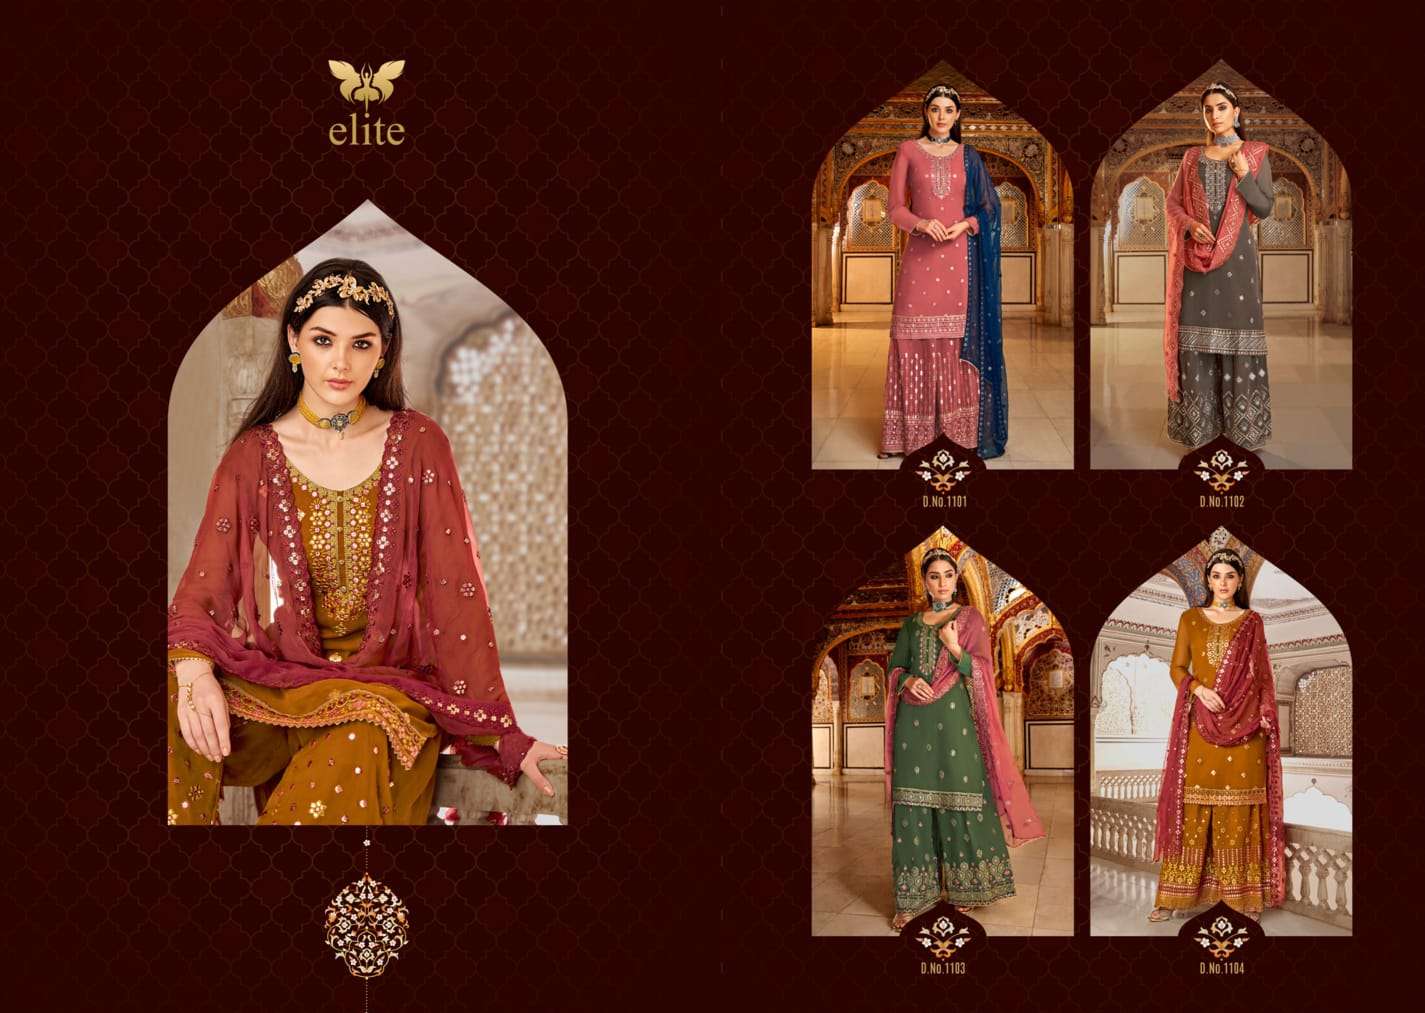 Elite By Mohini Fashion Readymade Wholesale Lowest Price Salwar Suit Set